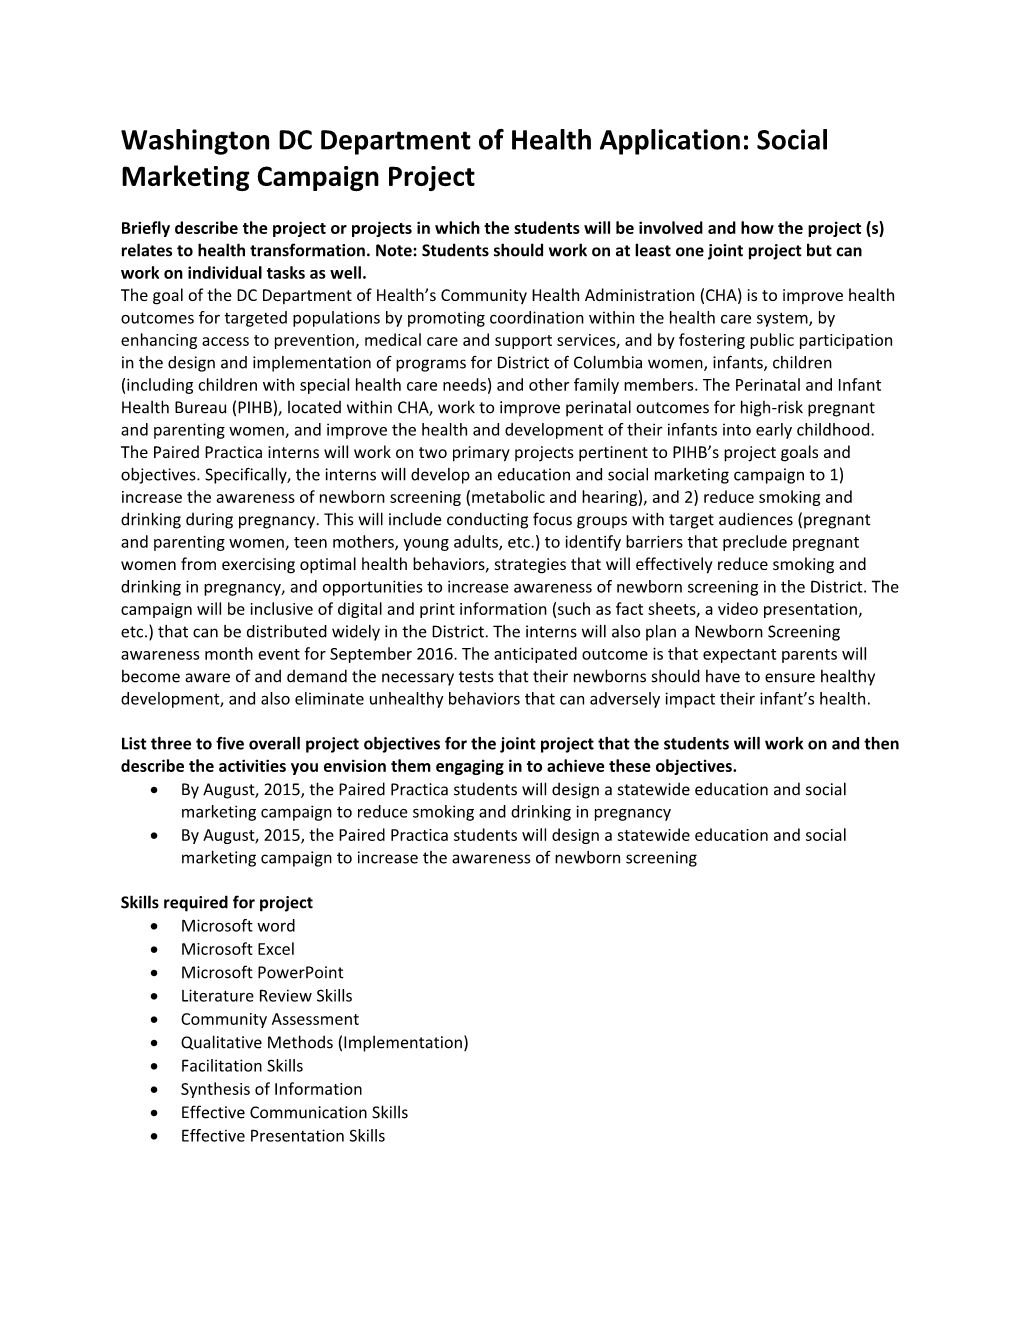 Washington DC Department of Health Application: Social Marketing Campaign Project